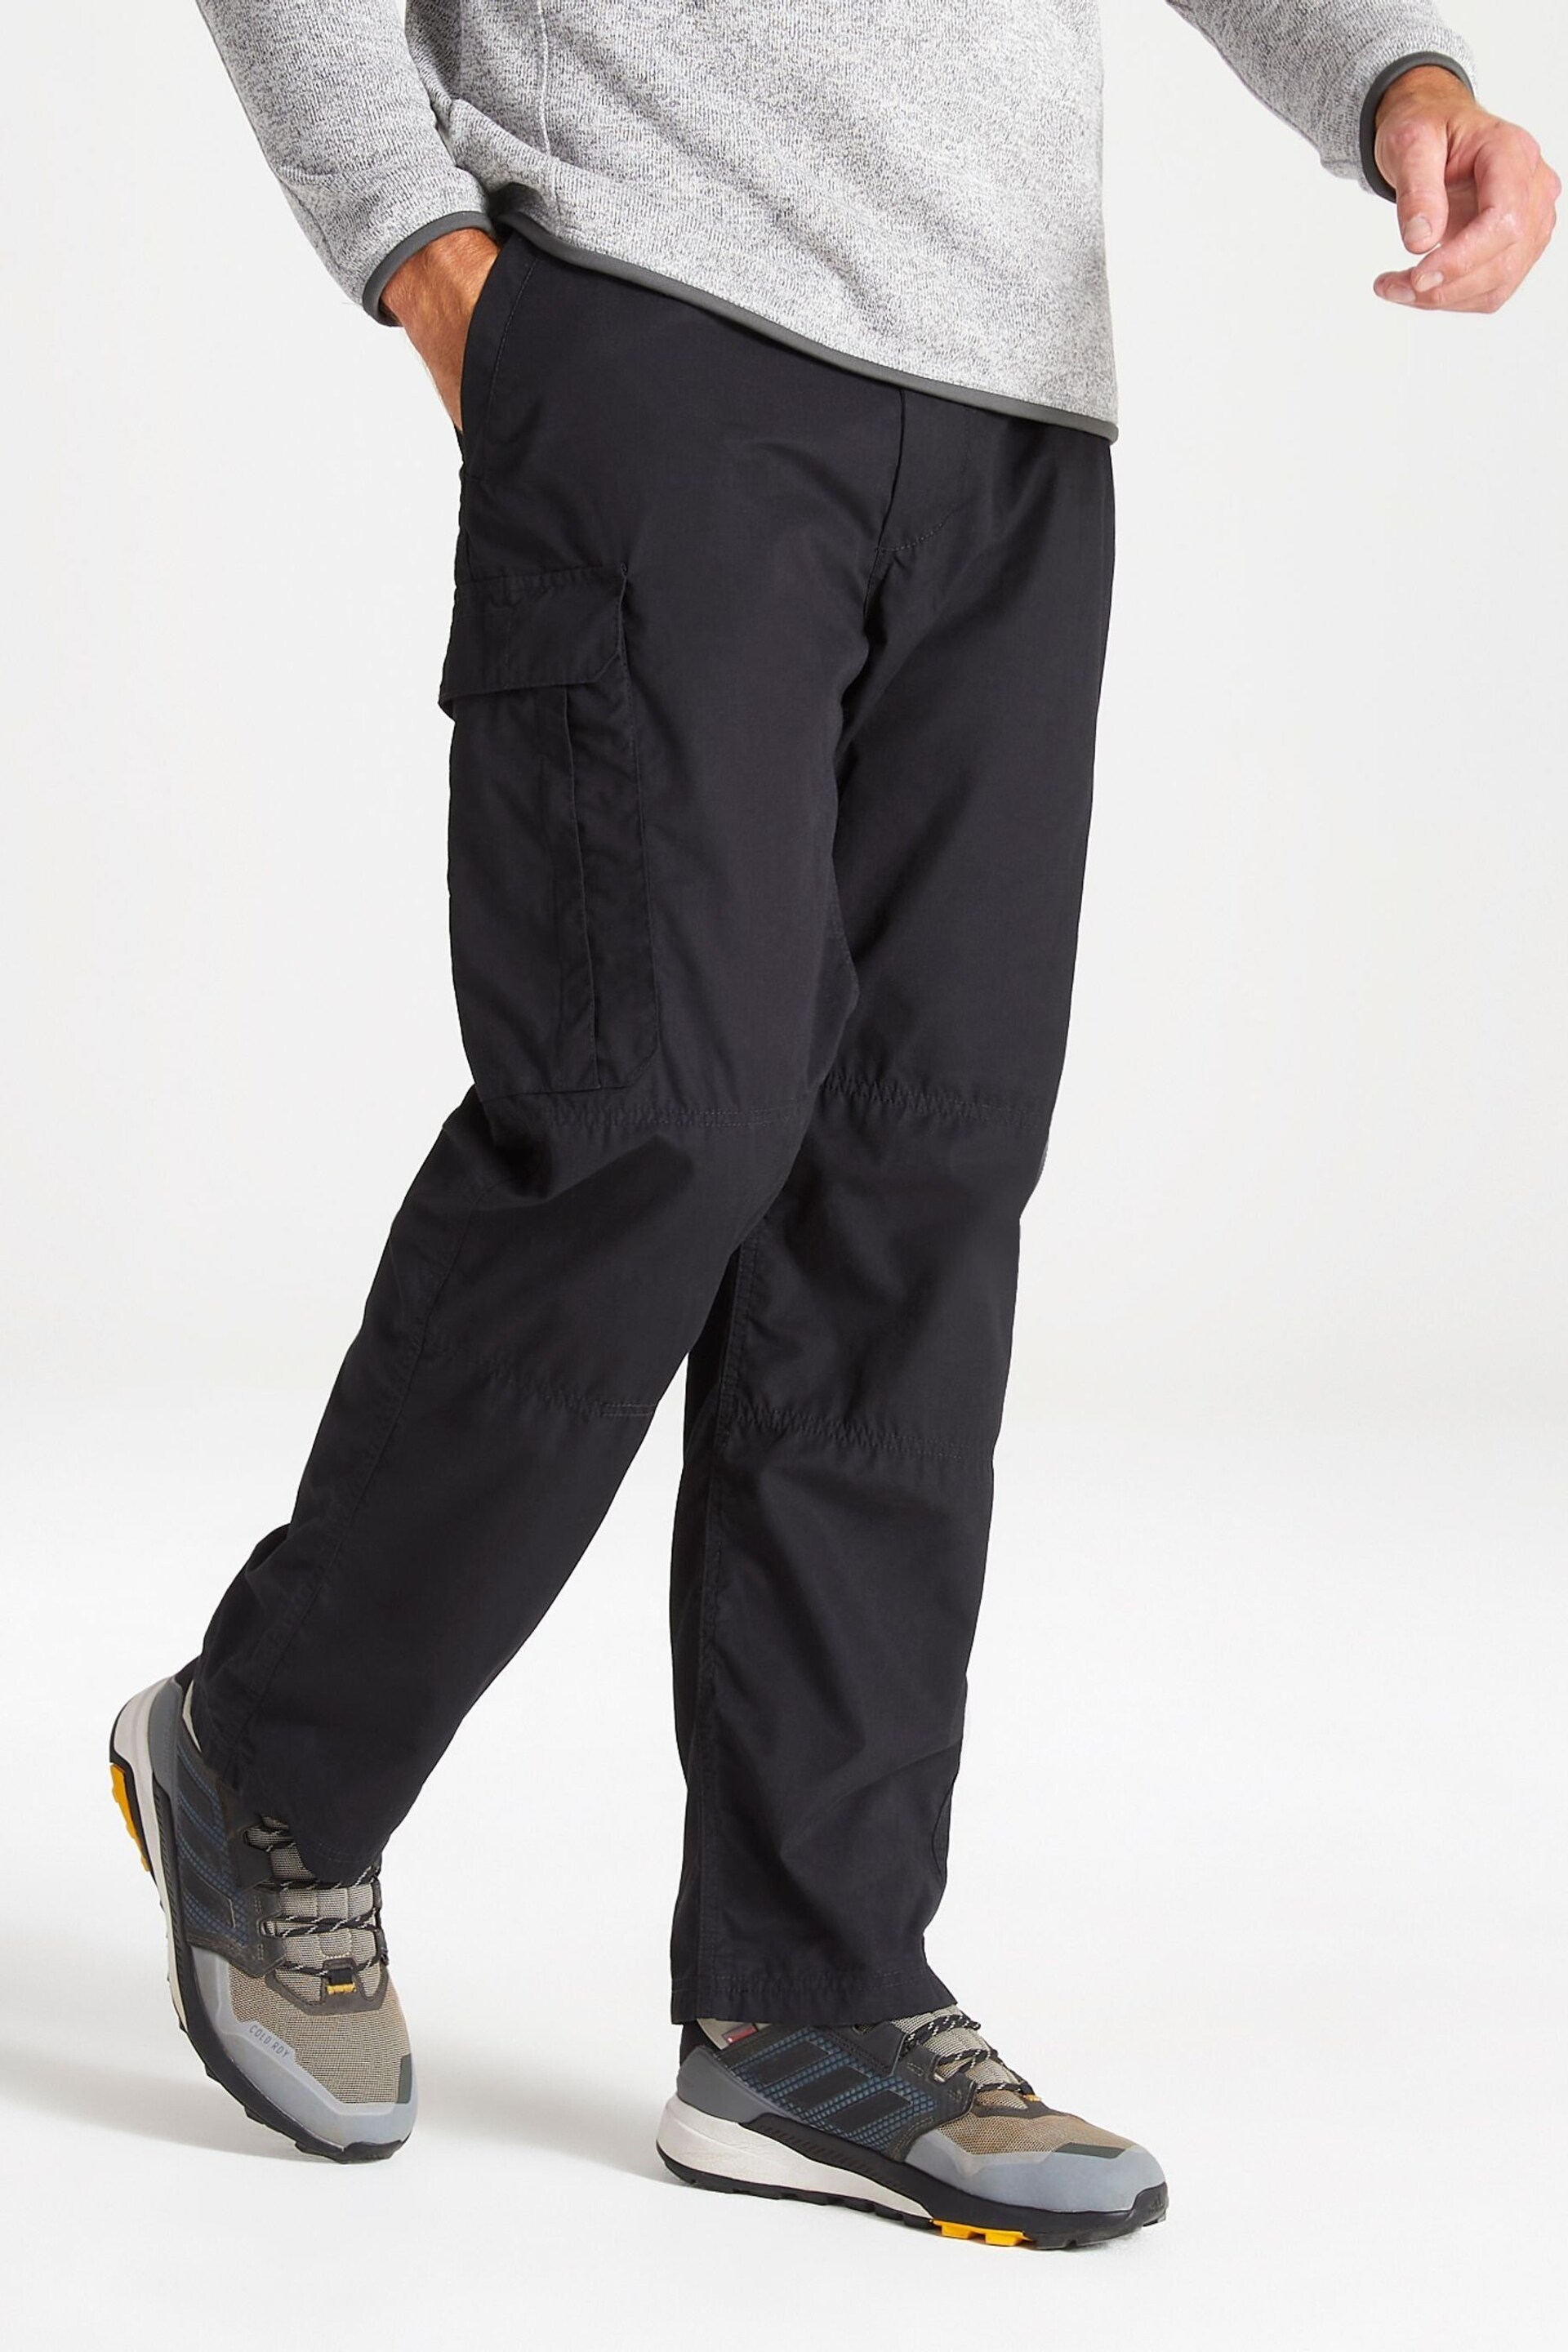 Craghoppers Black Kiwi Classic Trousers - Image 1 of 5